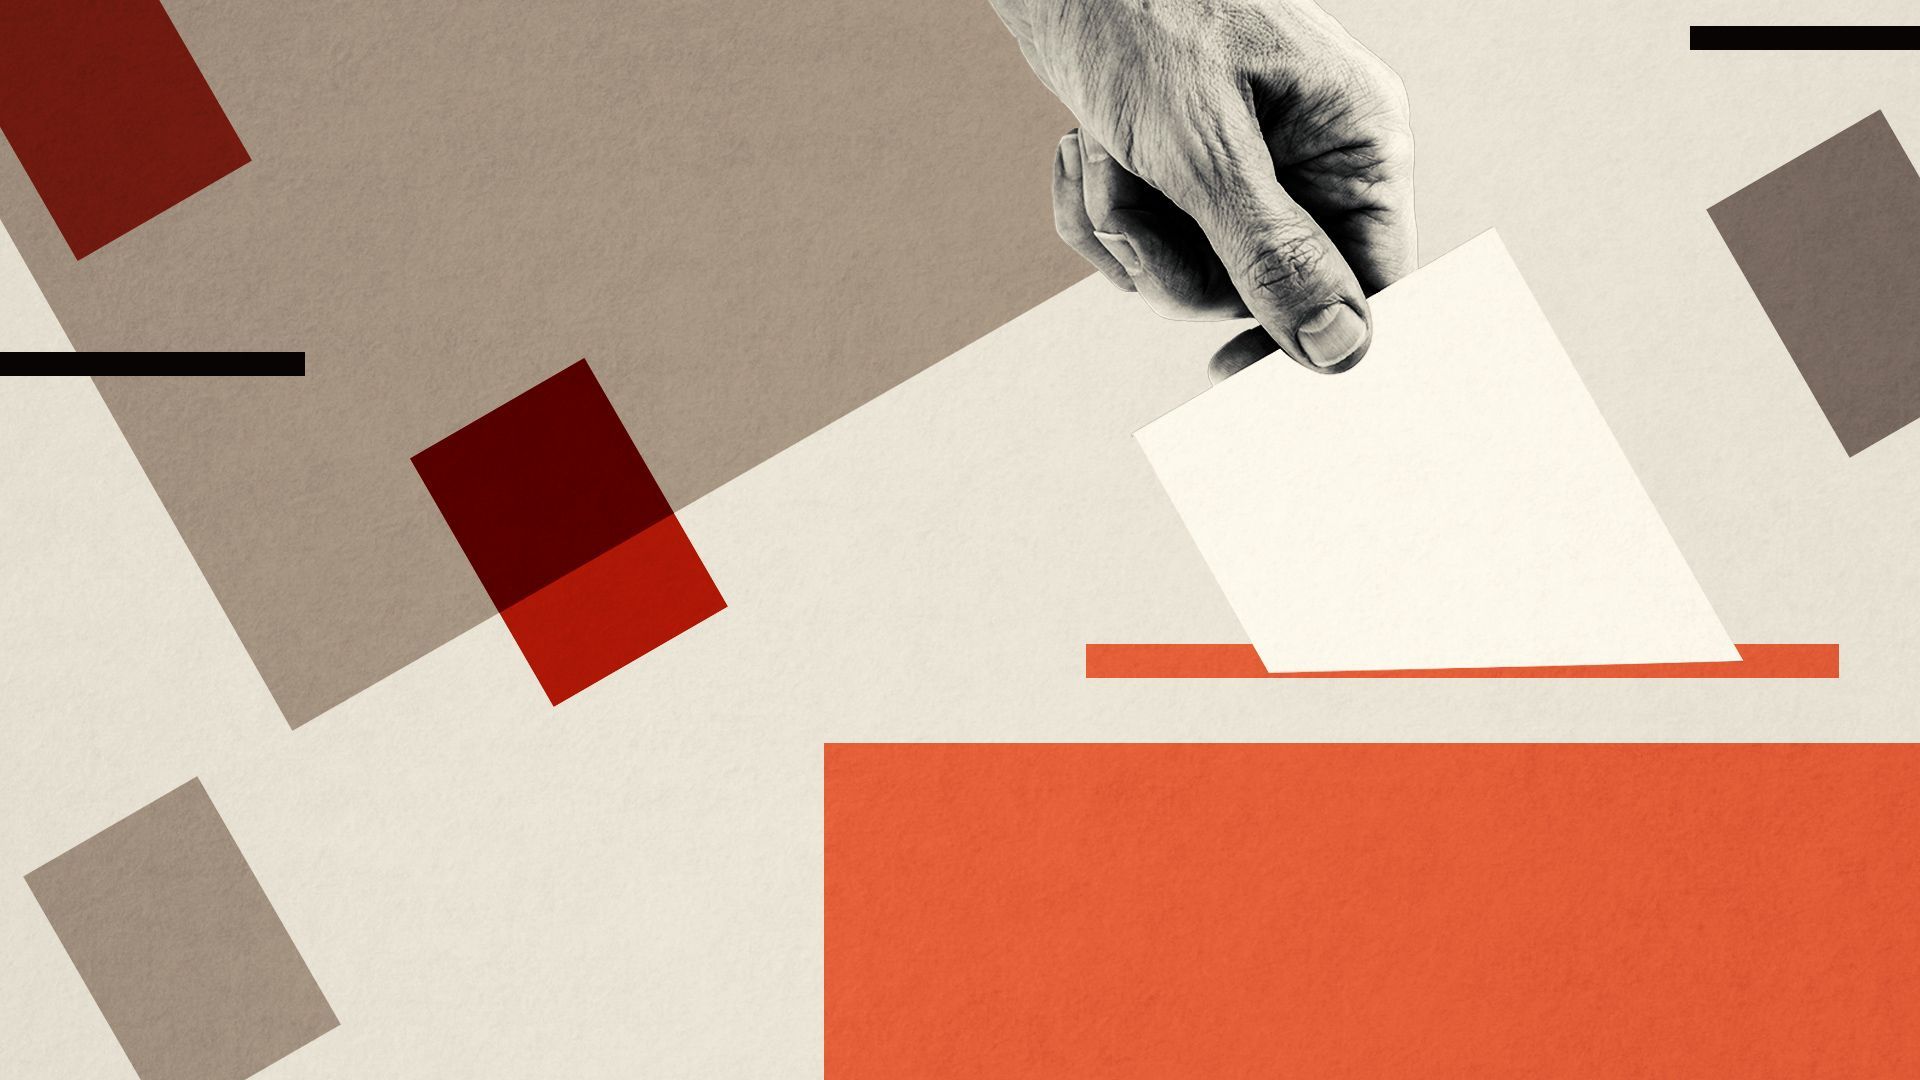 Illustration of a hand placing a ballot in a ballot box surrounded by abstract shapes.